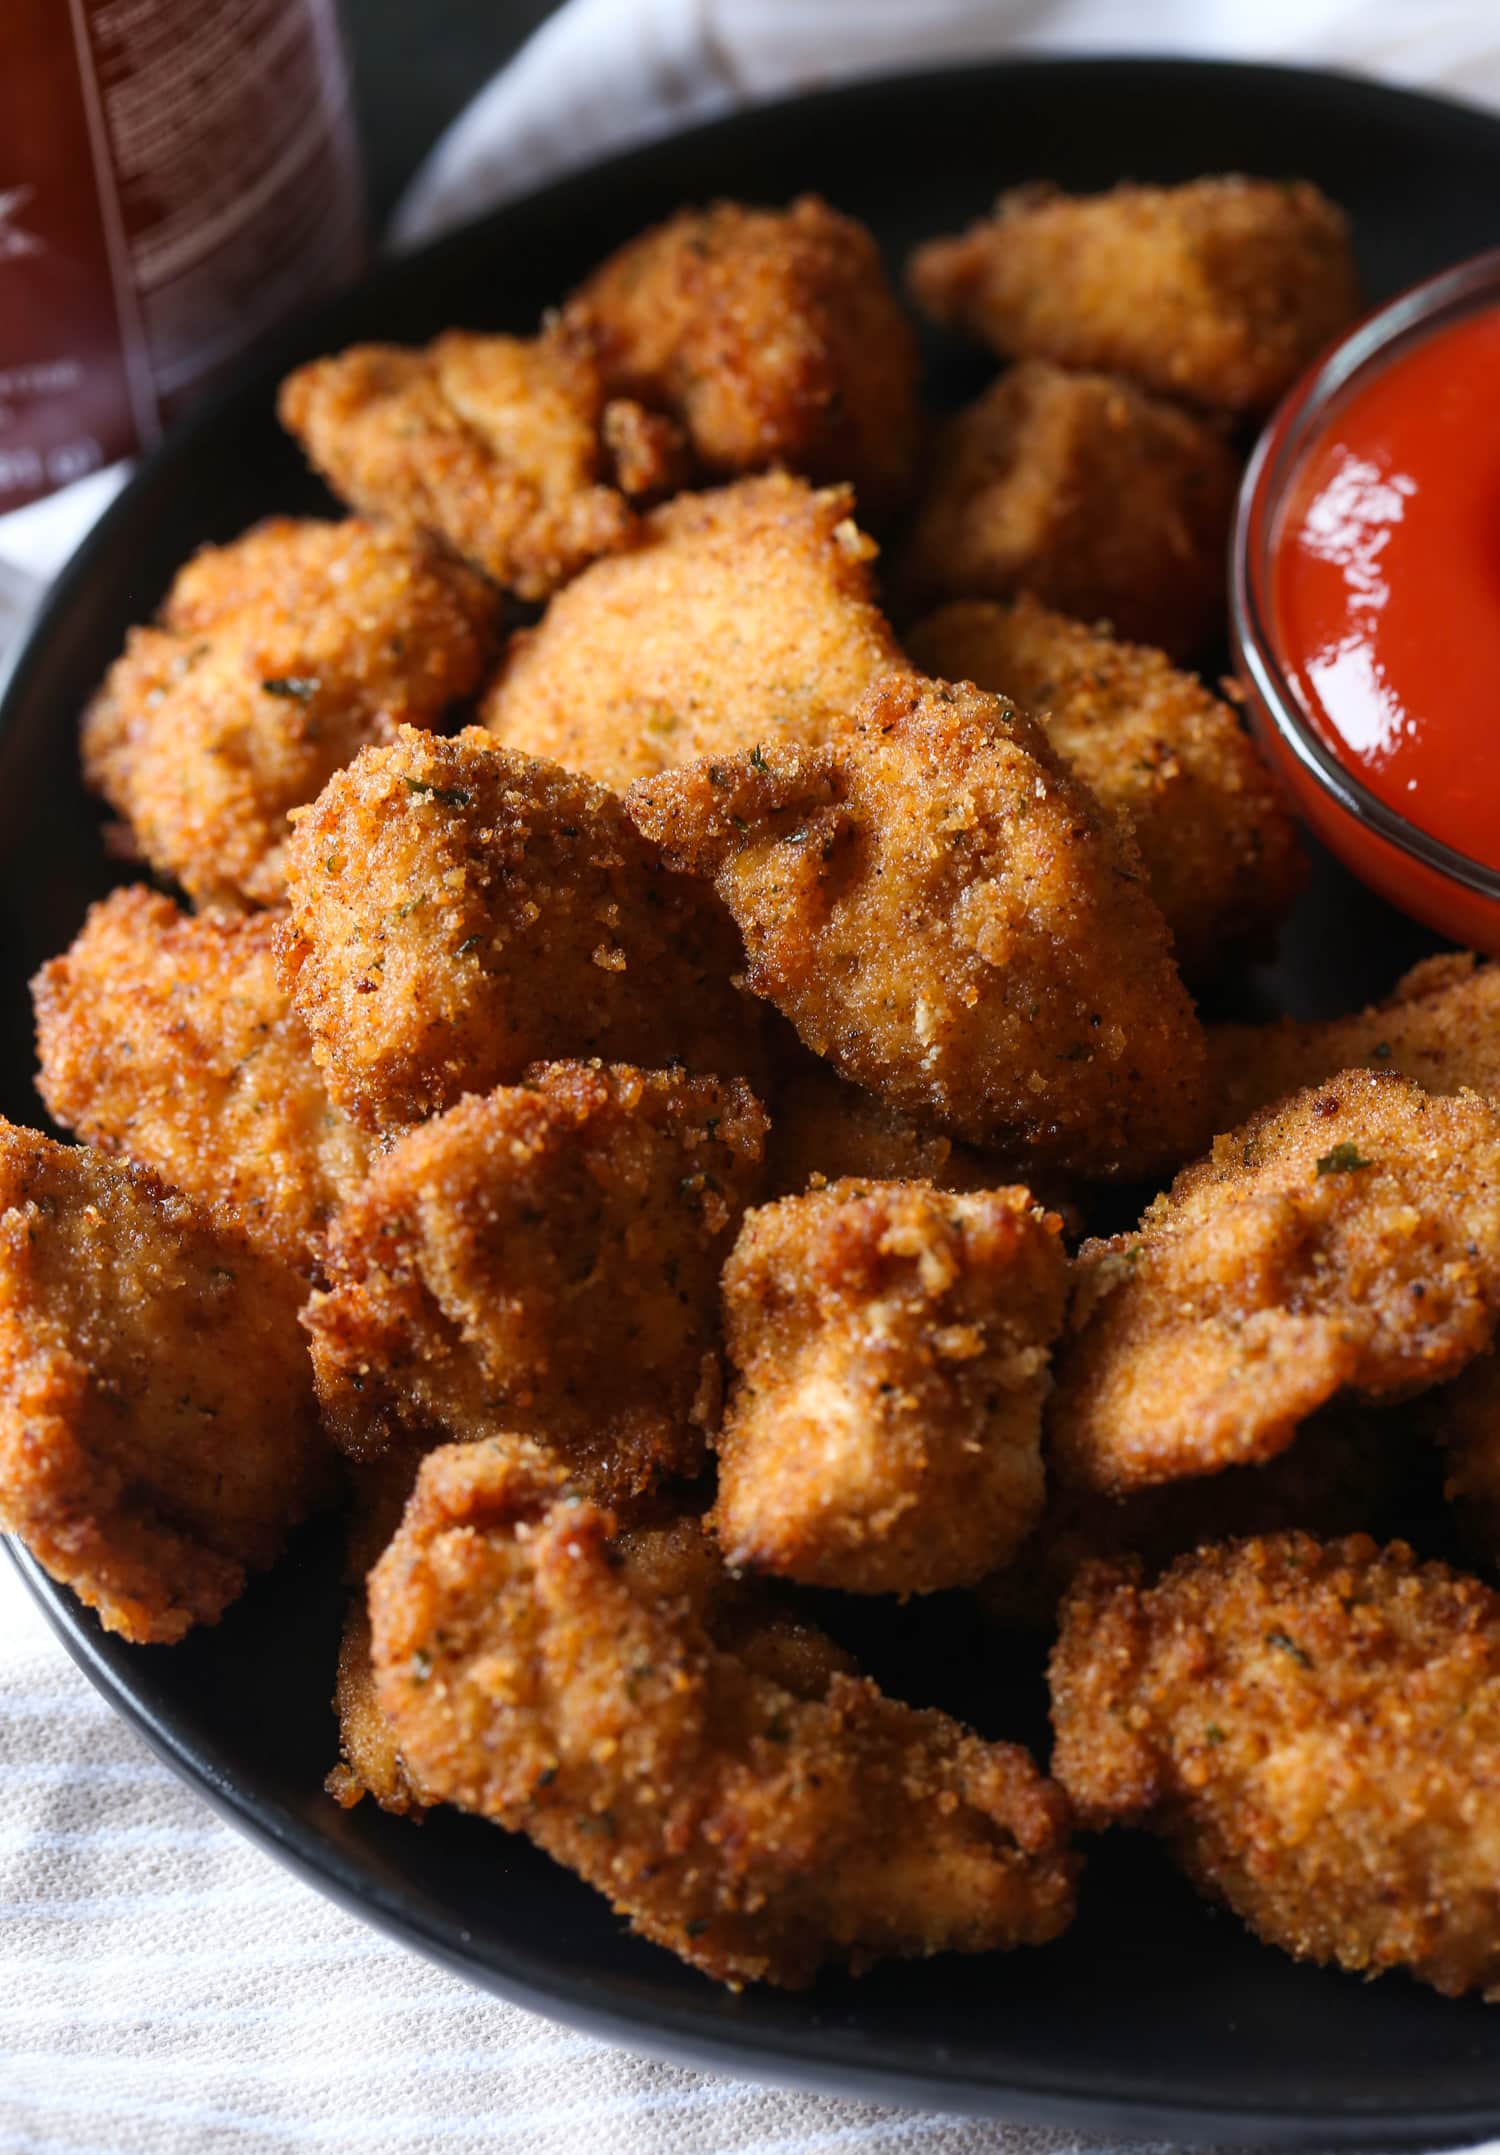 Spicy homemade chicken nuggets on a plate next to dipping sauce.